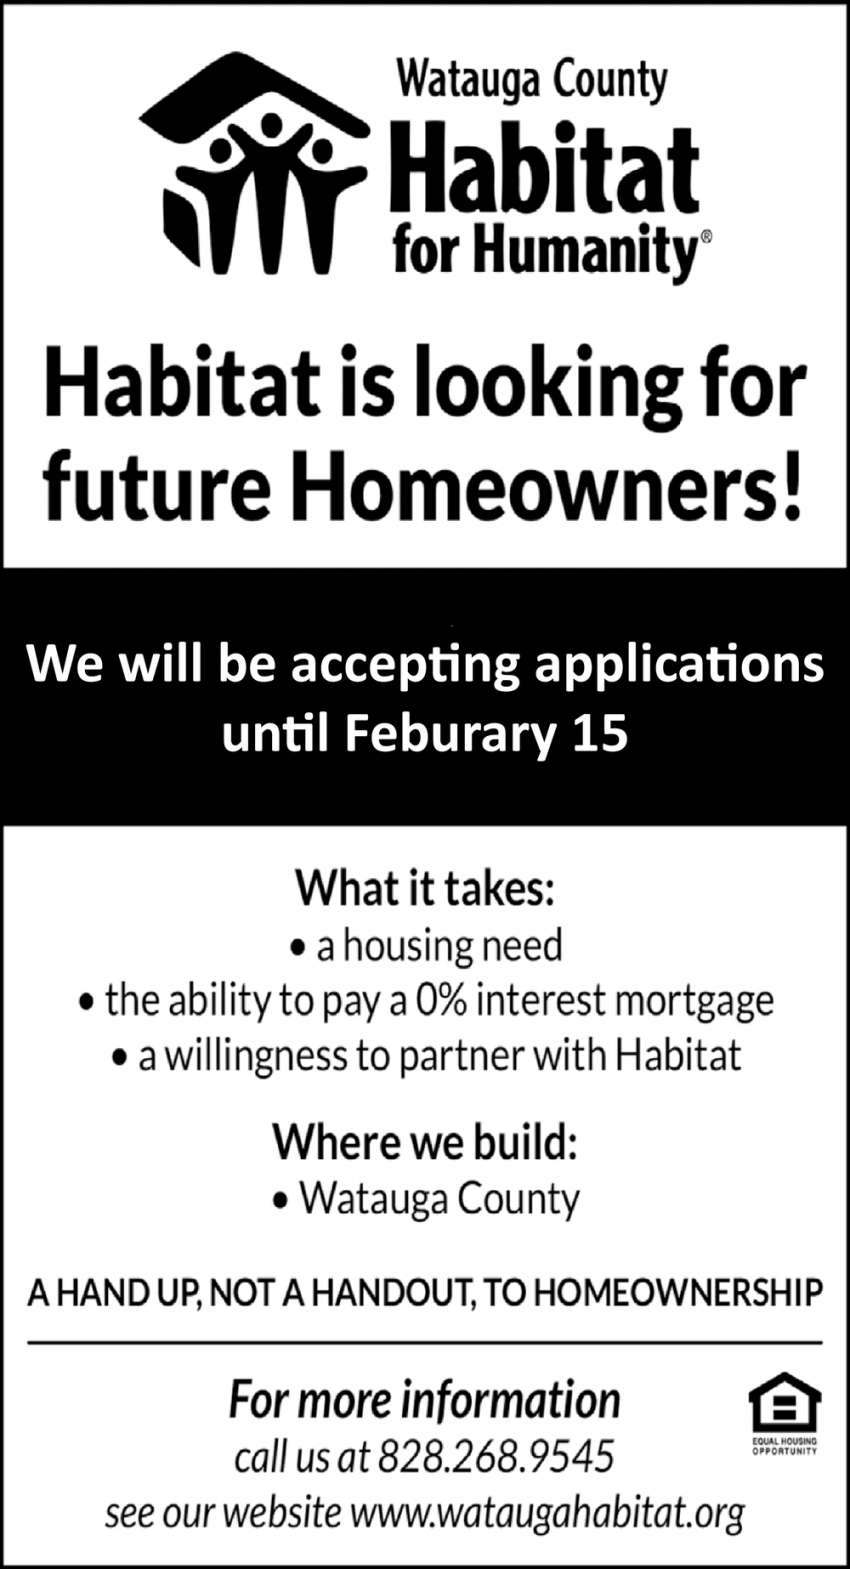 Habitat Is Looking for Future Homeowners!